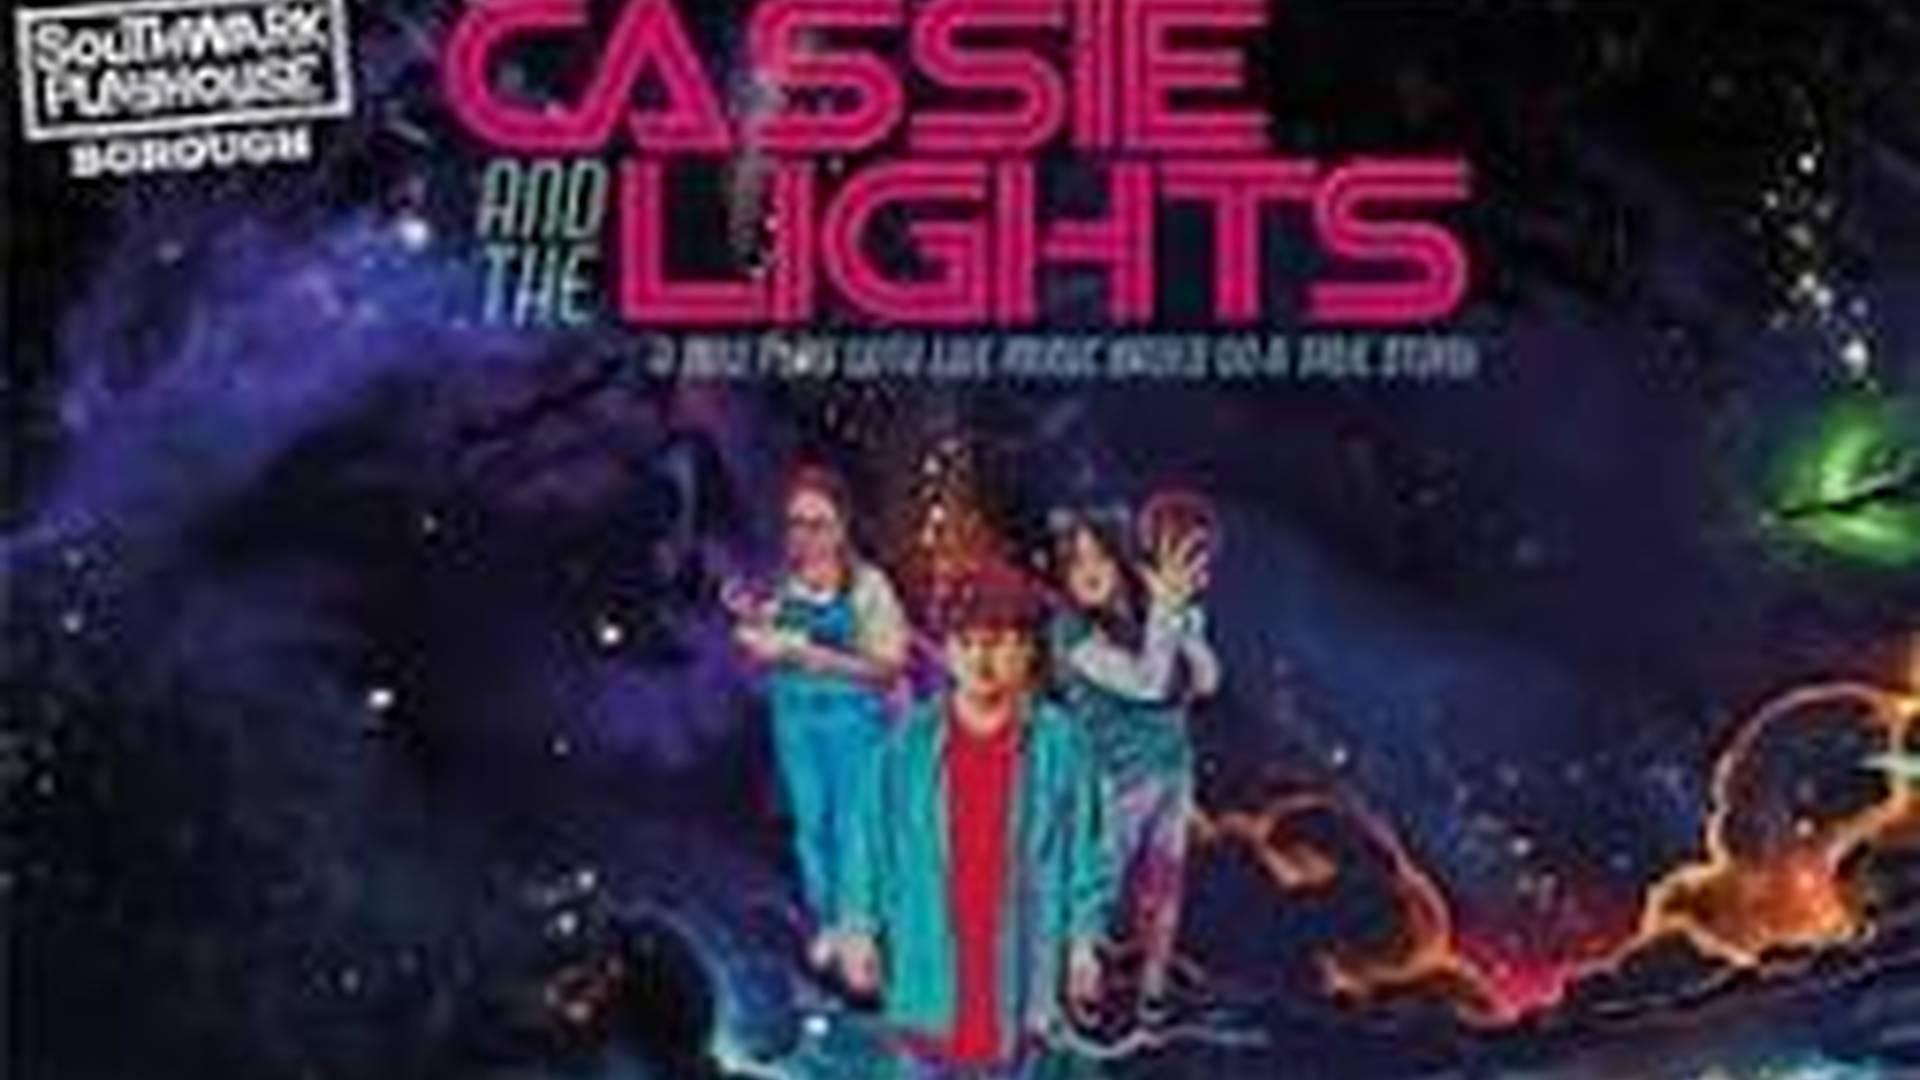 Cassie and the Lights photo